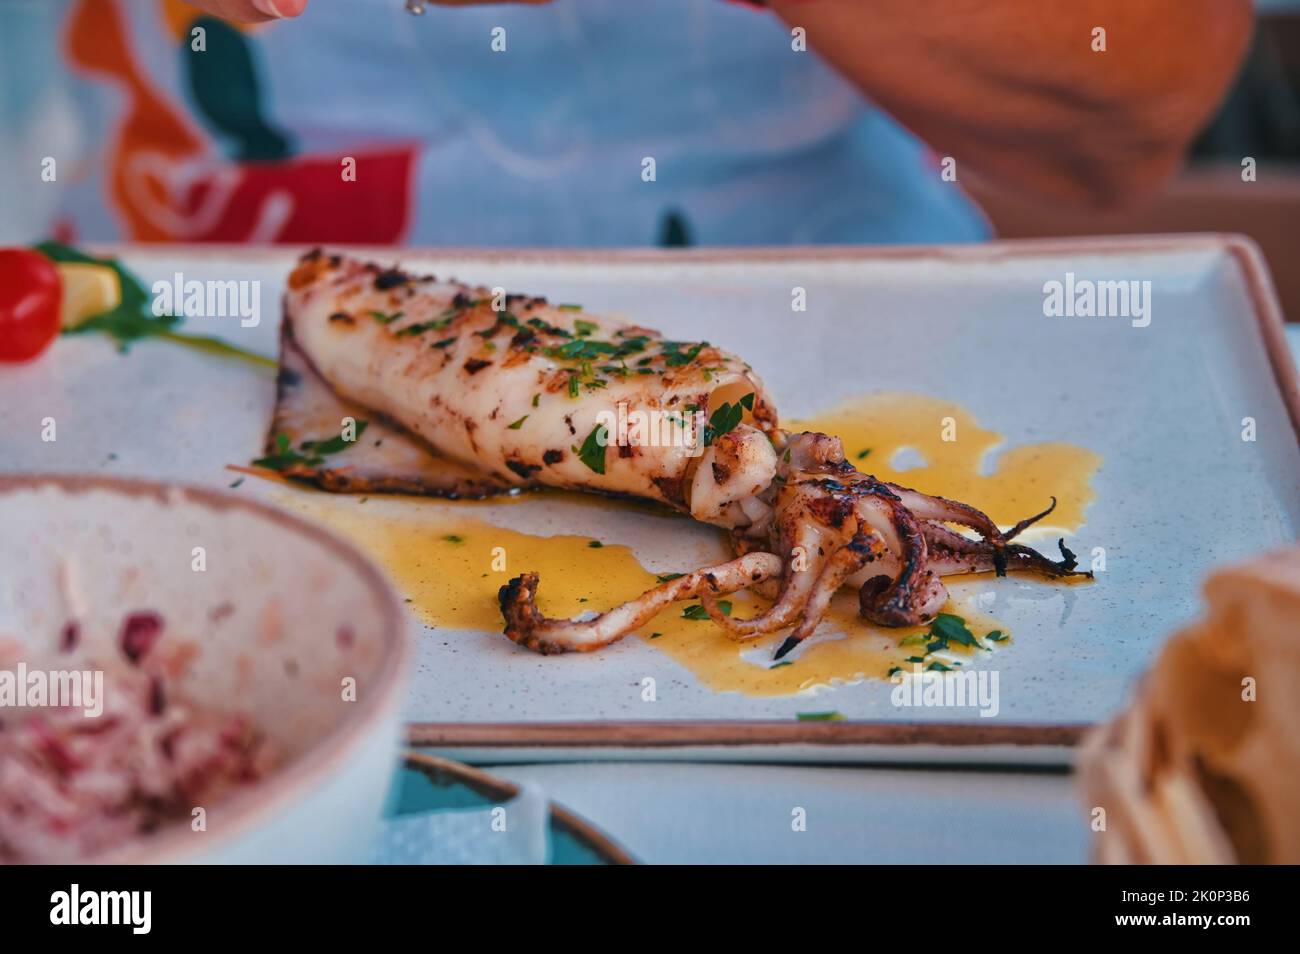 Calamari served on the table in restaurant Stock Photo